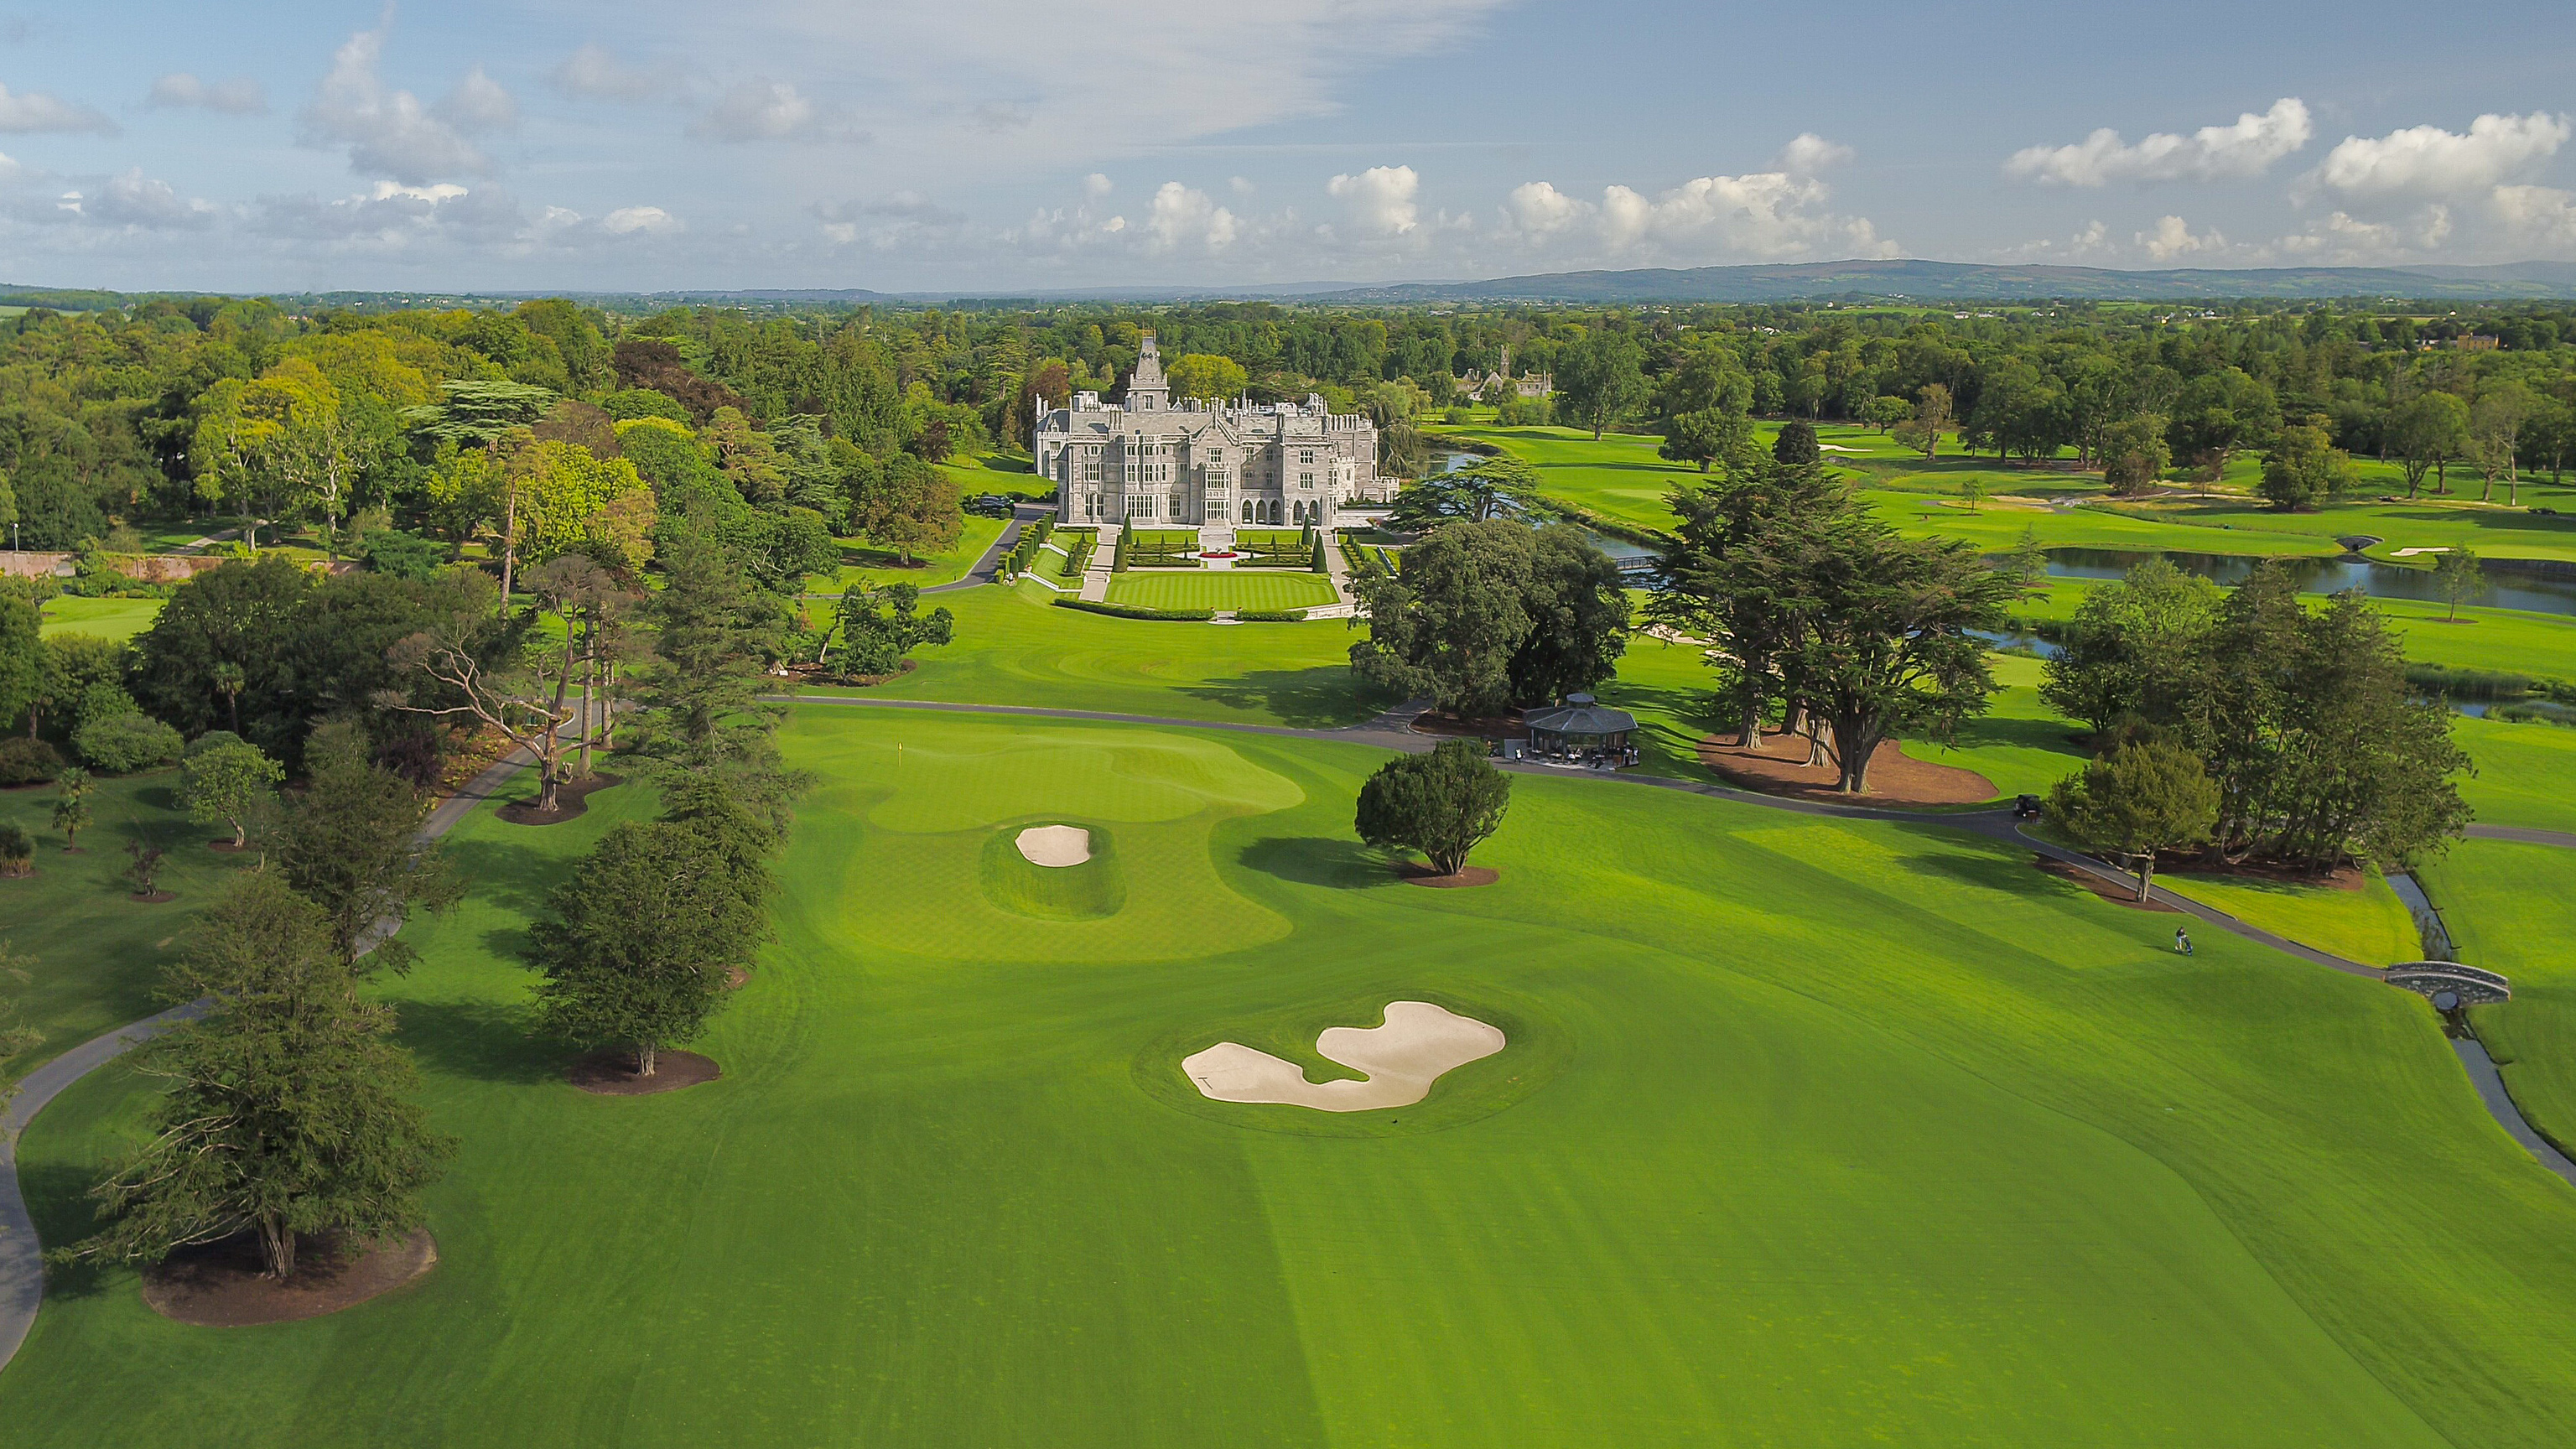 Image of the castle with the golf course of Adare Manor.